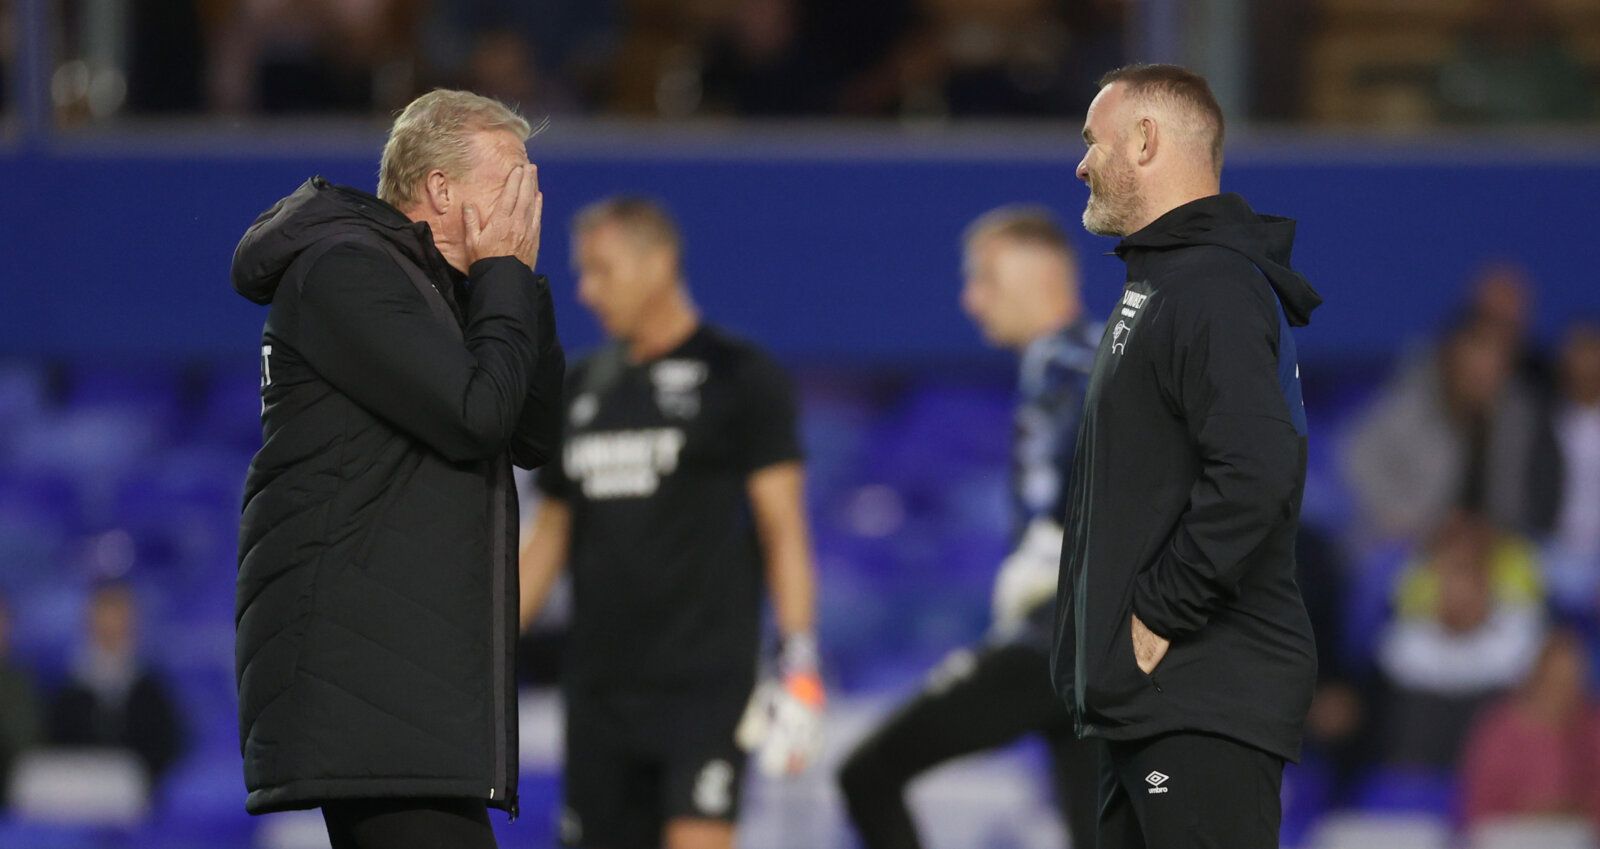 Soccer Football - Championship - Birmingham City v Derby County - St Andrew's, Birmingham, Britain - September 10, 2021 Derby County manager Wayne Rooney and Steve McClaren after the match Action Images/Carl Recine EDITORIAL USE ONLY. No use with unauthorized audio, video, data, fixture lists, club/league logos or 'live' services. Online in-match use limited to 75 images, no video emulation. No use in betting, games or single club /league/player publications.  Please contact your account represe